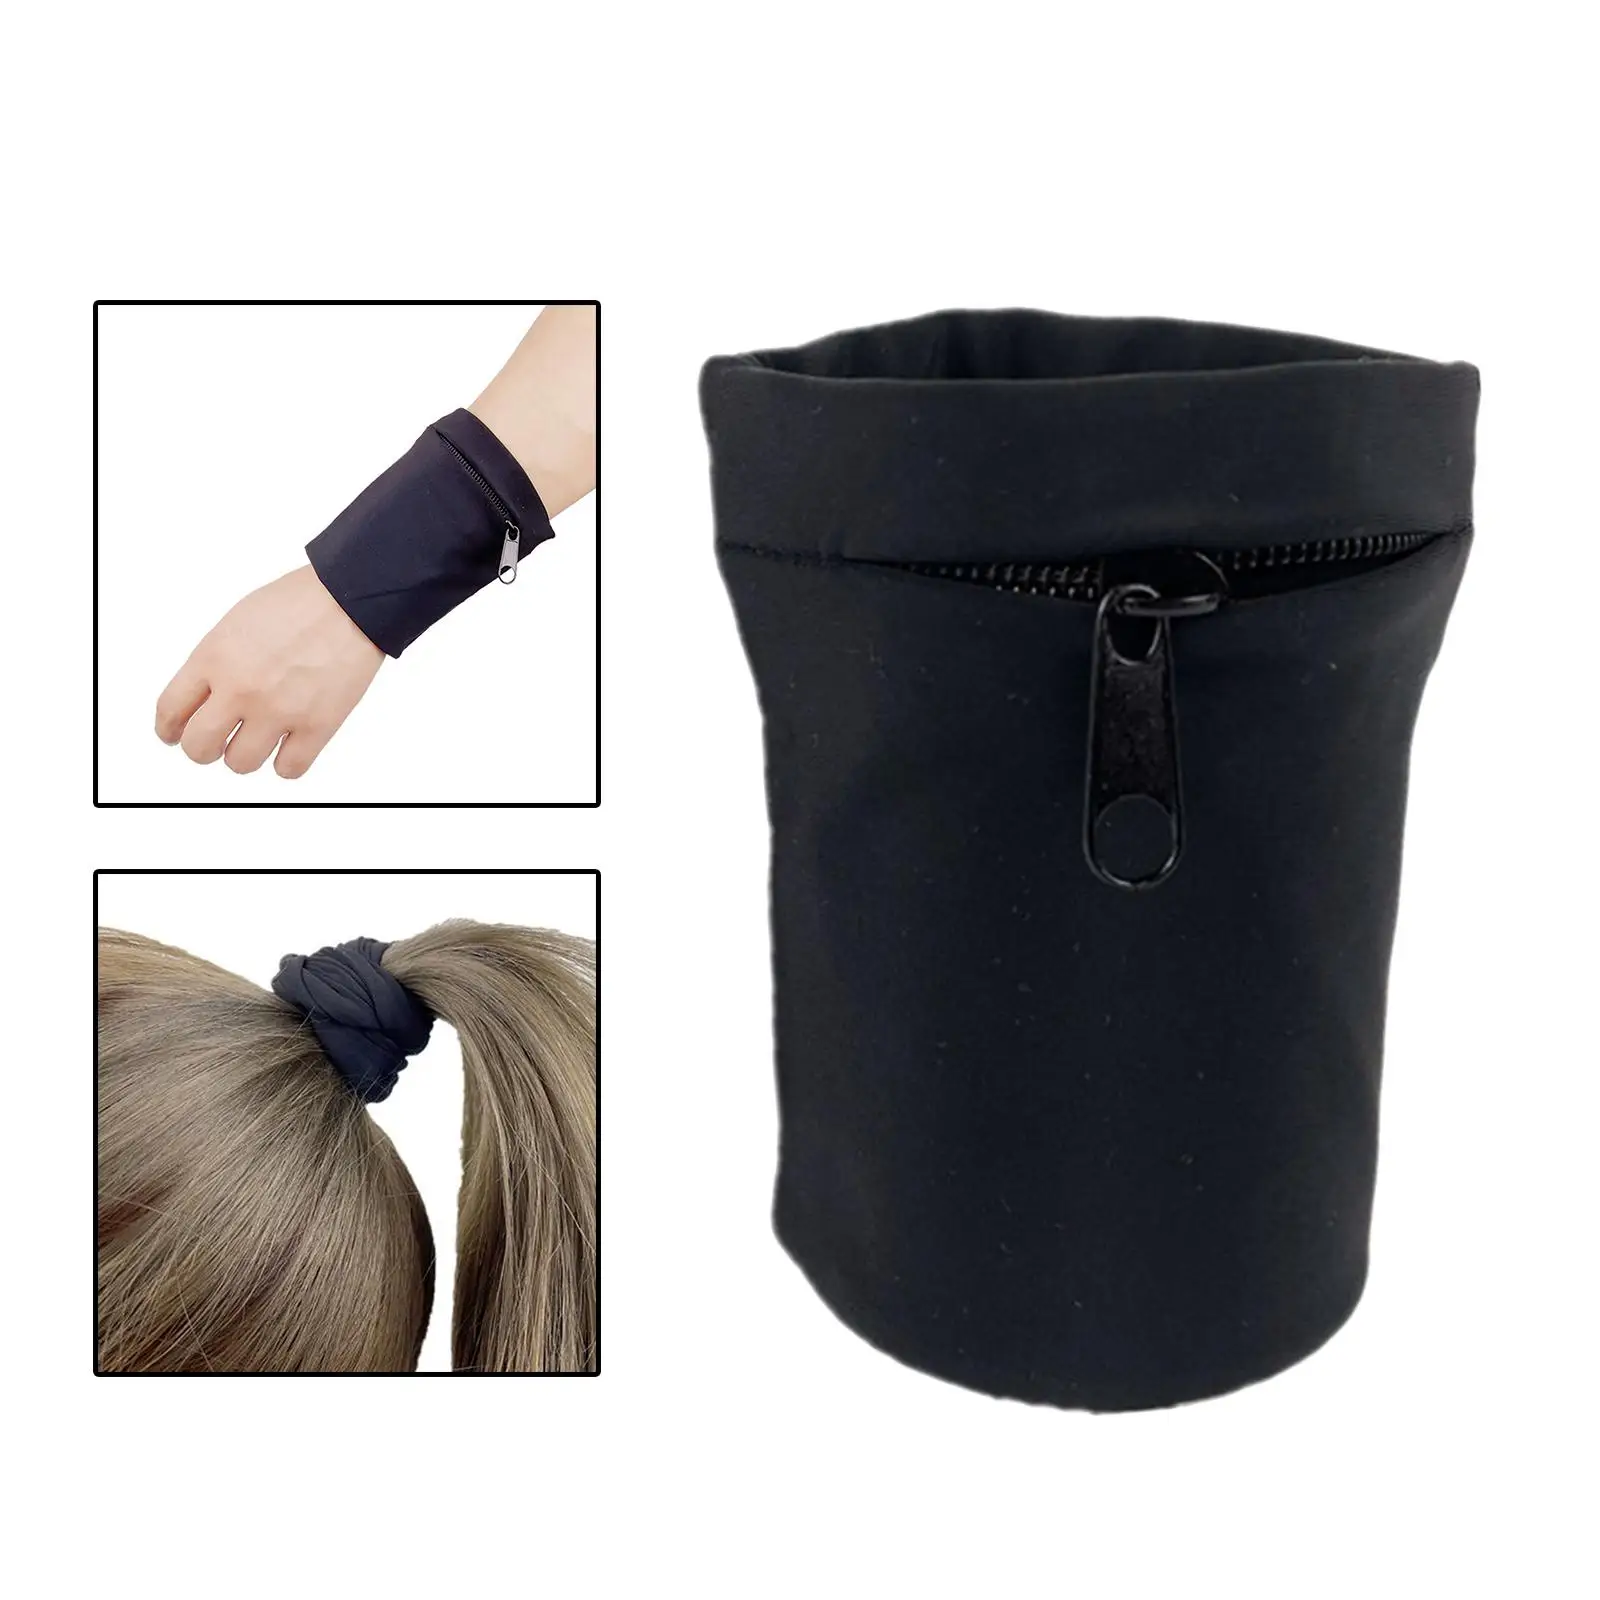 Phone Wristband Cellphone Holder Armband Bag Wallet for Running Hiking Workout